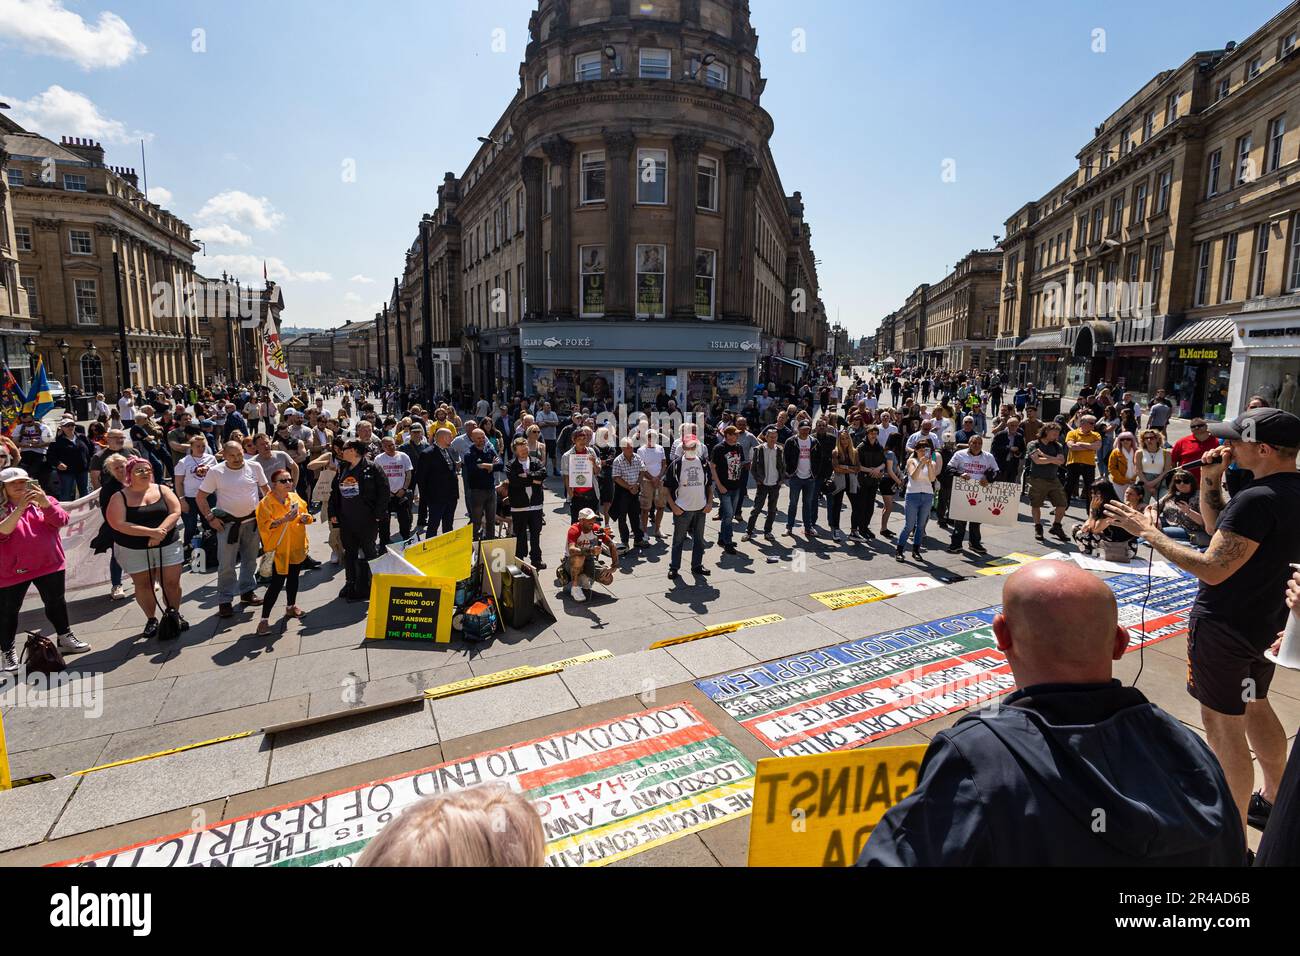 A diverse group of people walking down a bustling urban street in the bright light of day in protest Stock Photo